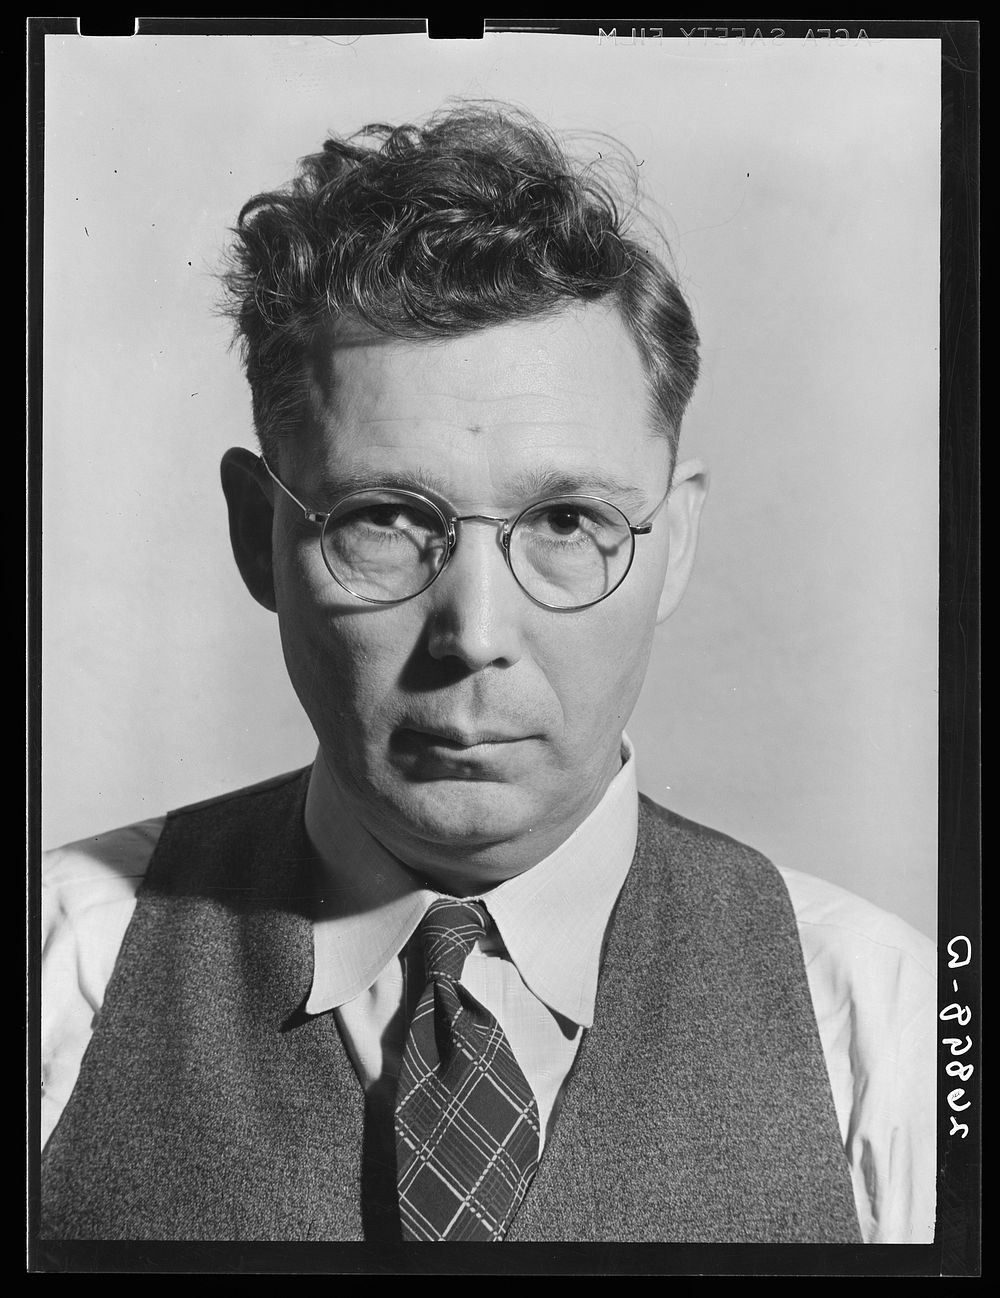 Officer of UMWA (United Mine Workers of America). Herrin, Illinois. Sourced from the Library of Congress.